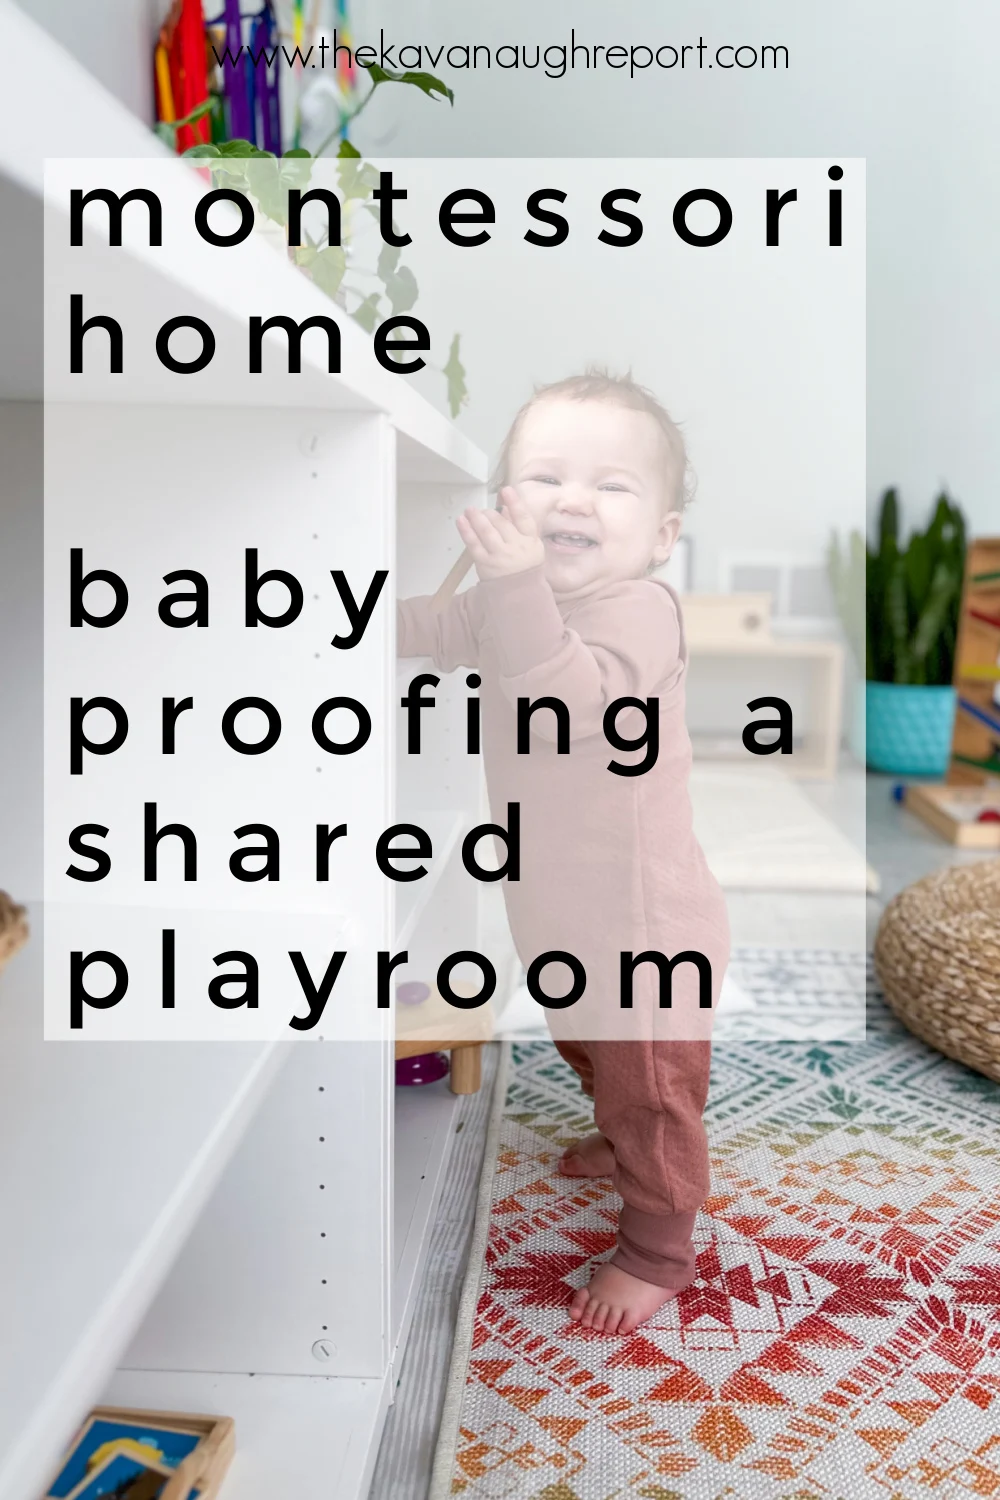 Five tips on how to baby proof a Montessori playroom for a toddler and baby. Practical and easy ways to share a play space from a Montessori parent